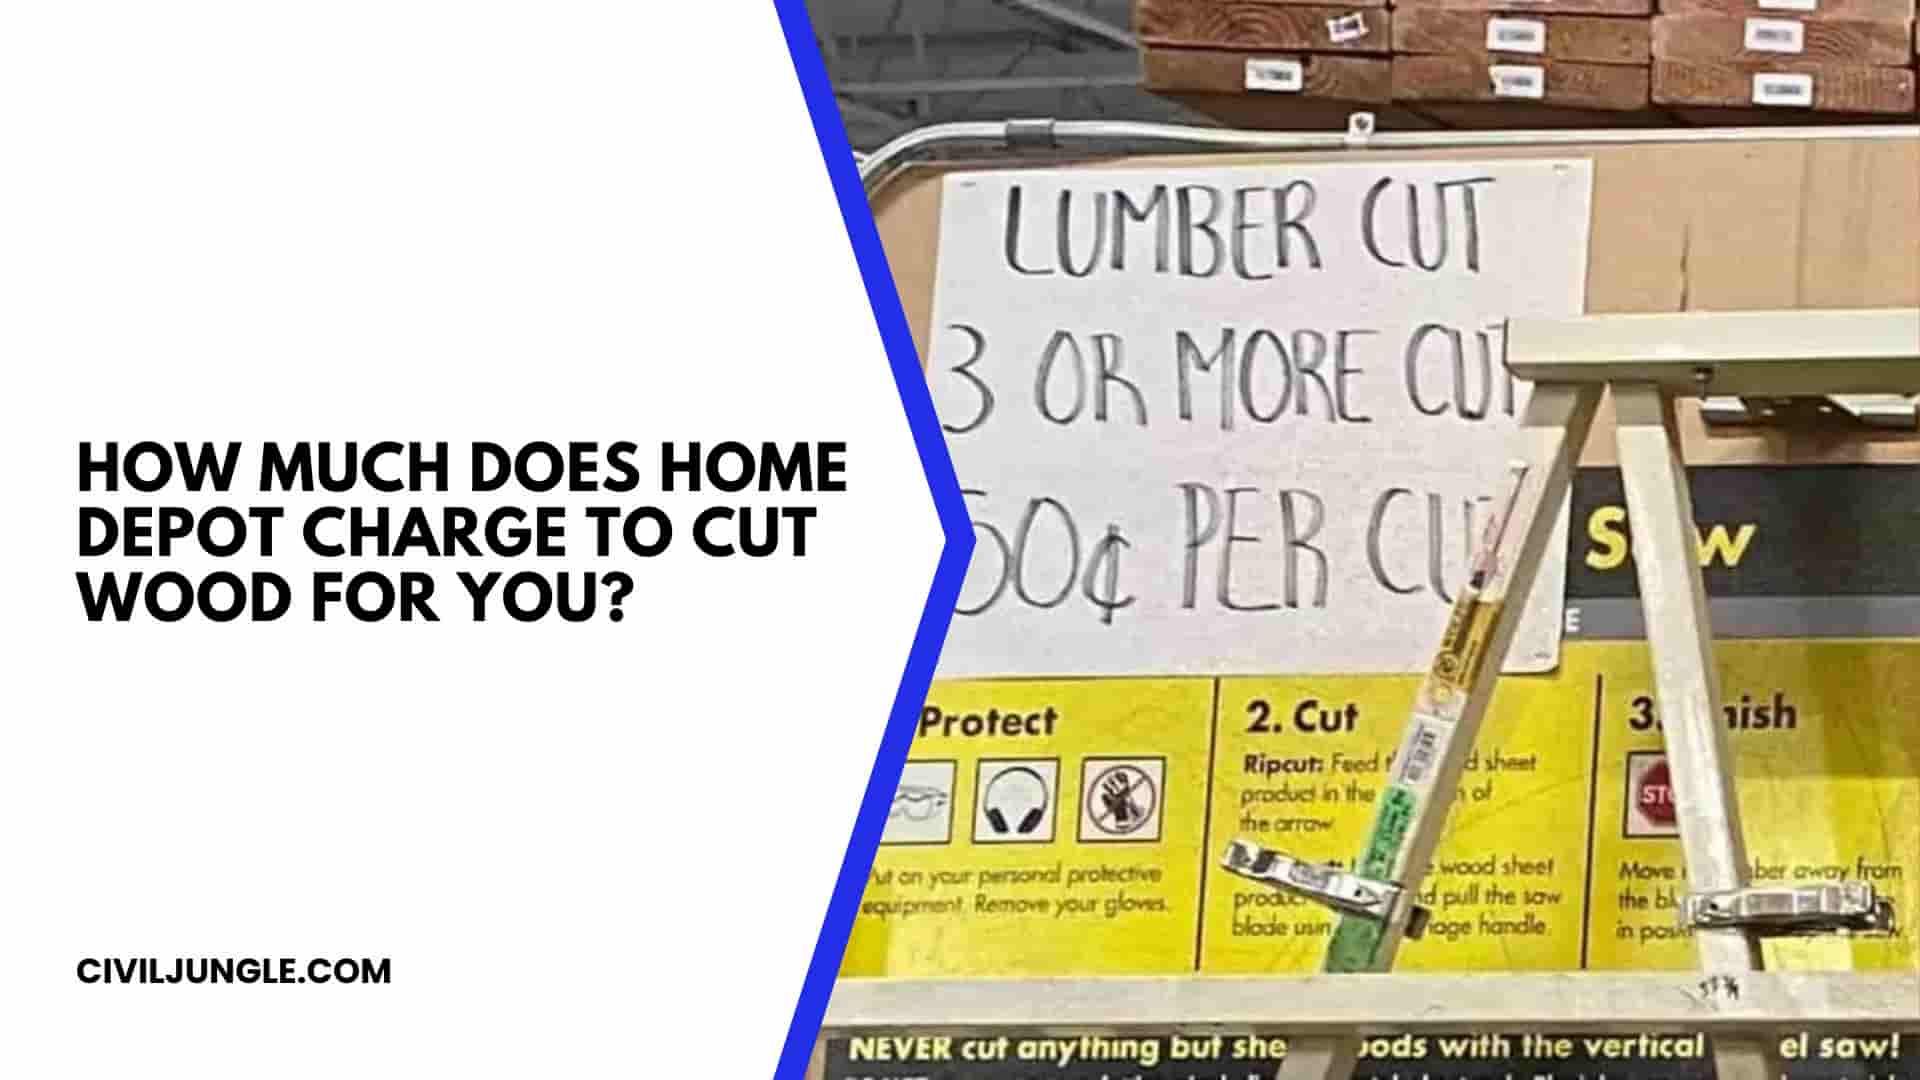 How Much Does Home Depot Charge To Cut Wood For You?